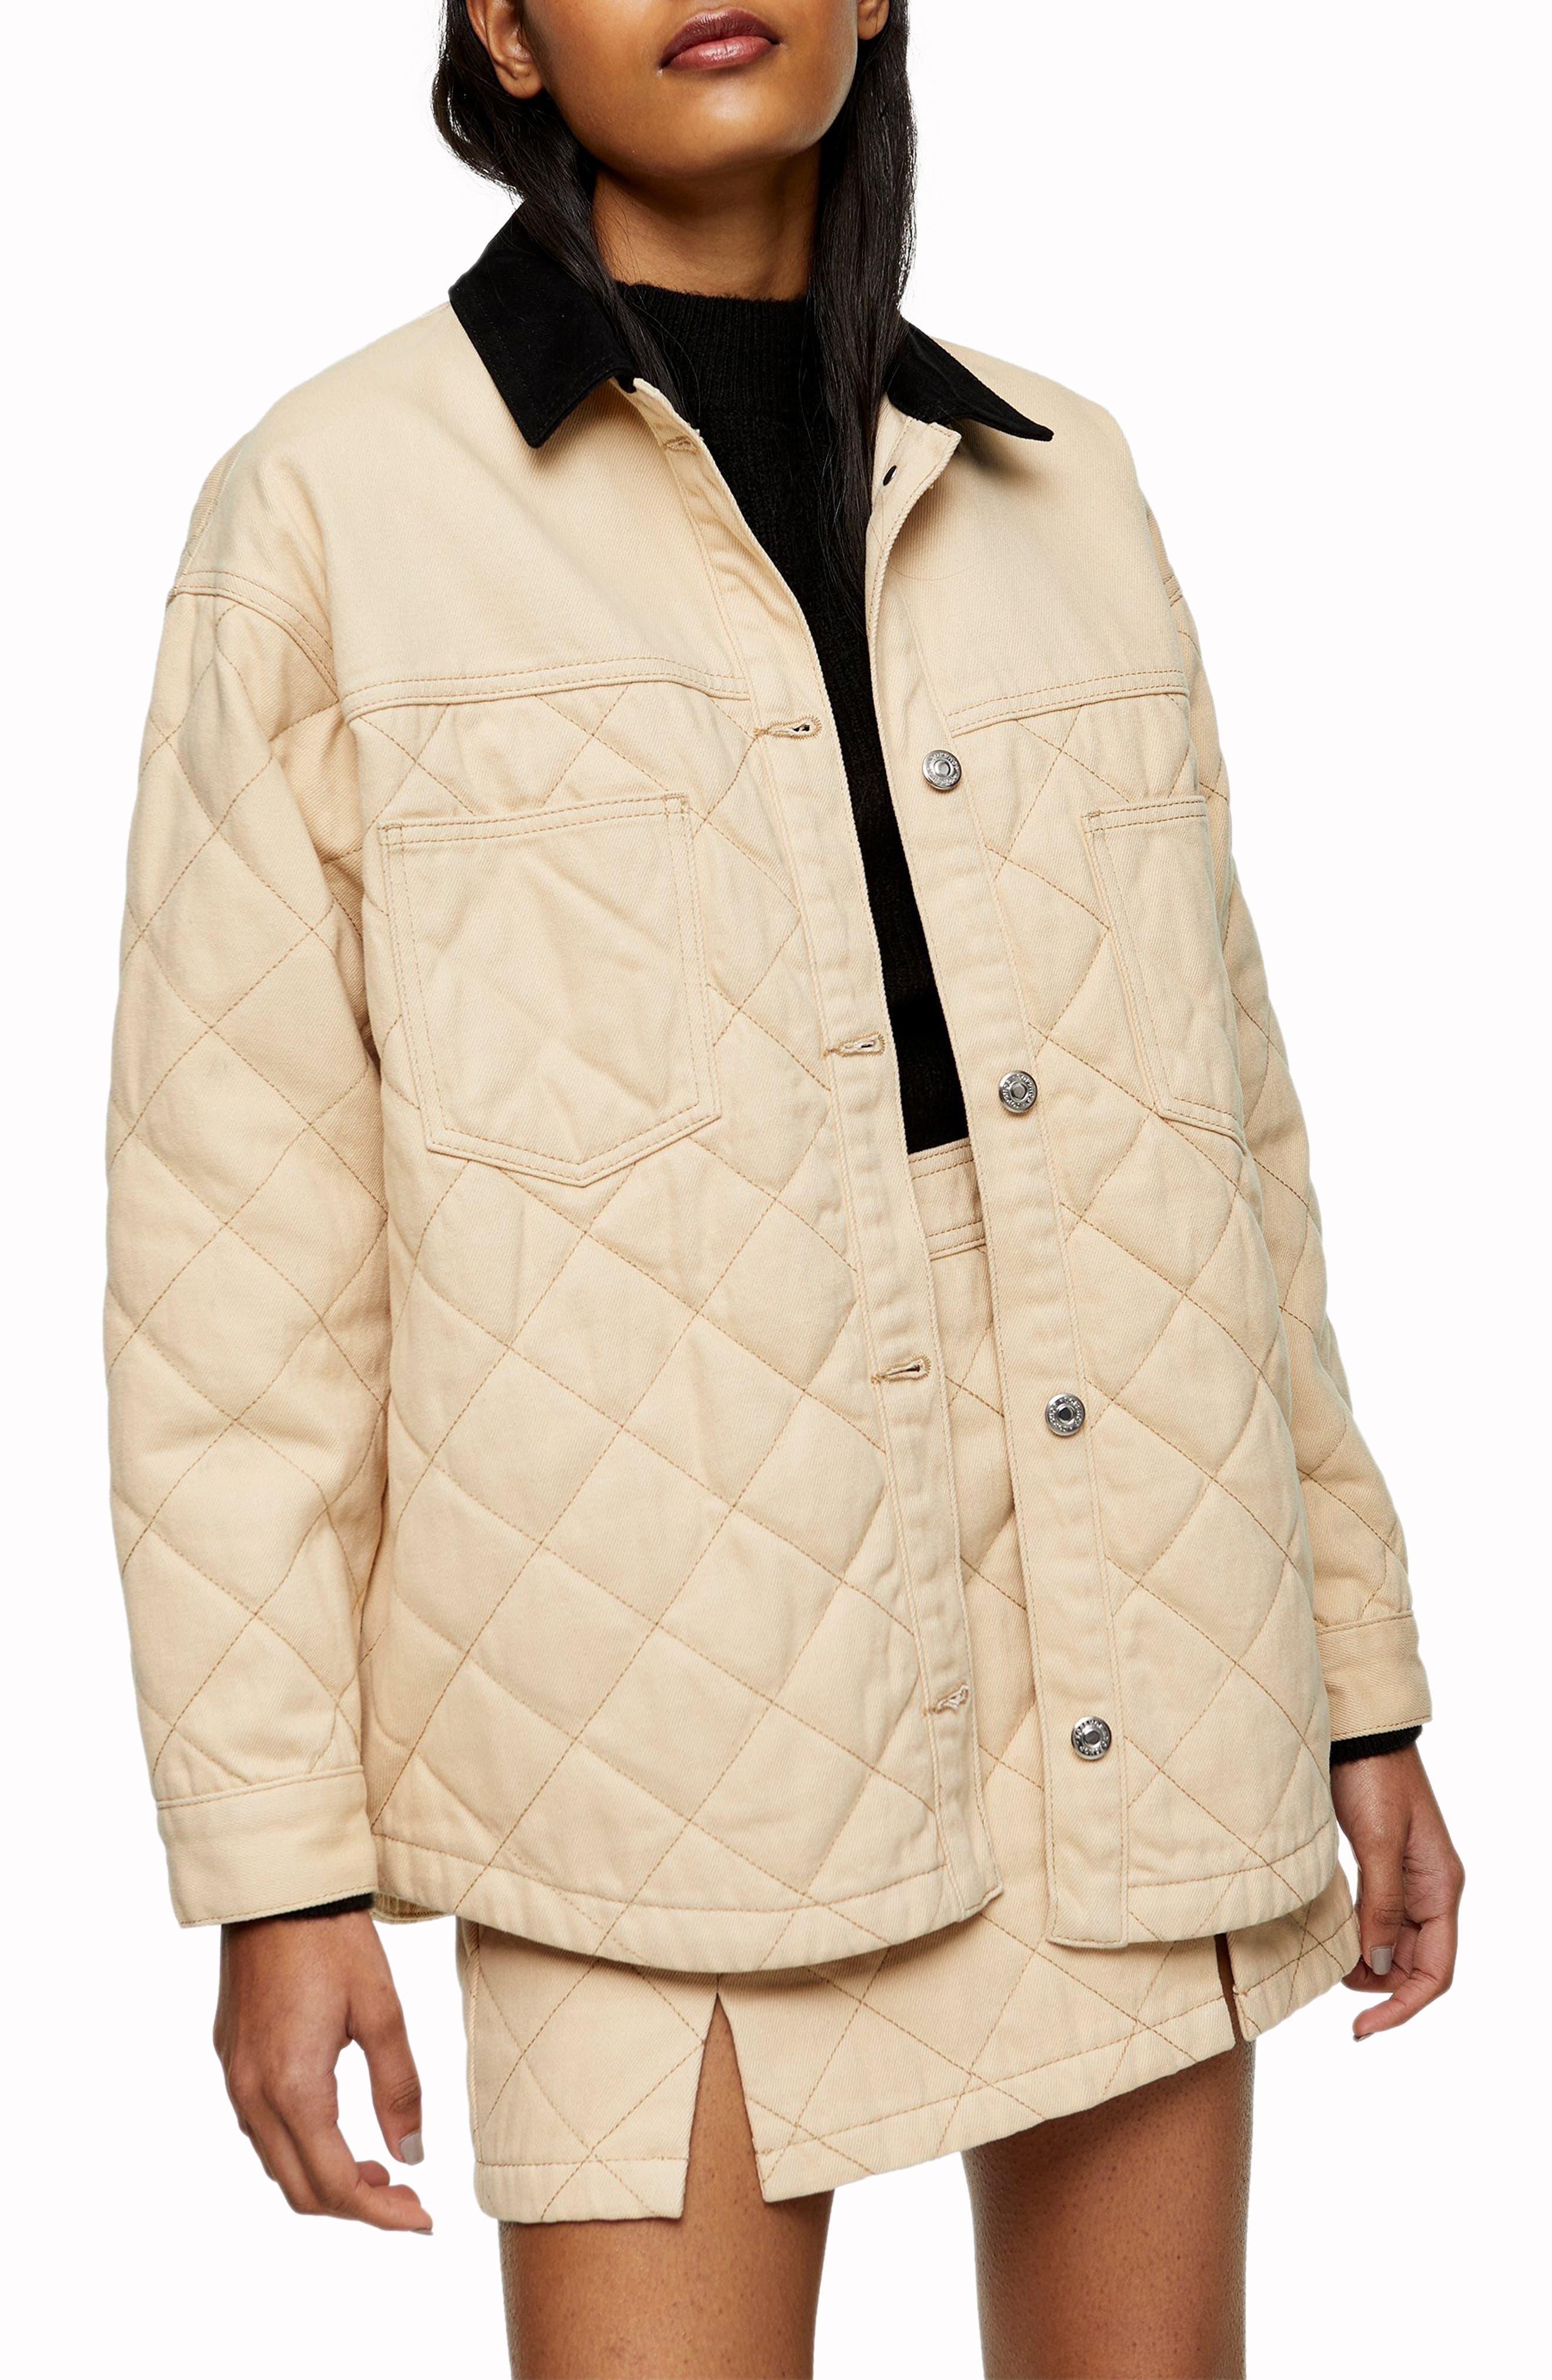 TOPSHOP Quilted Denim Jacket in Cream (Natural) - Lyst